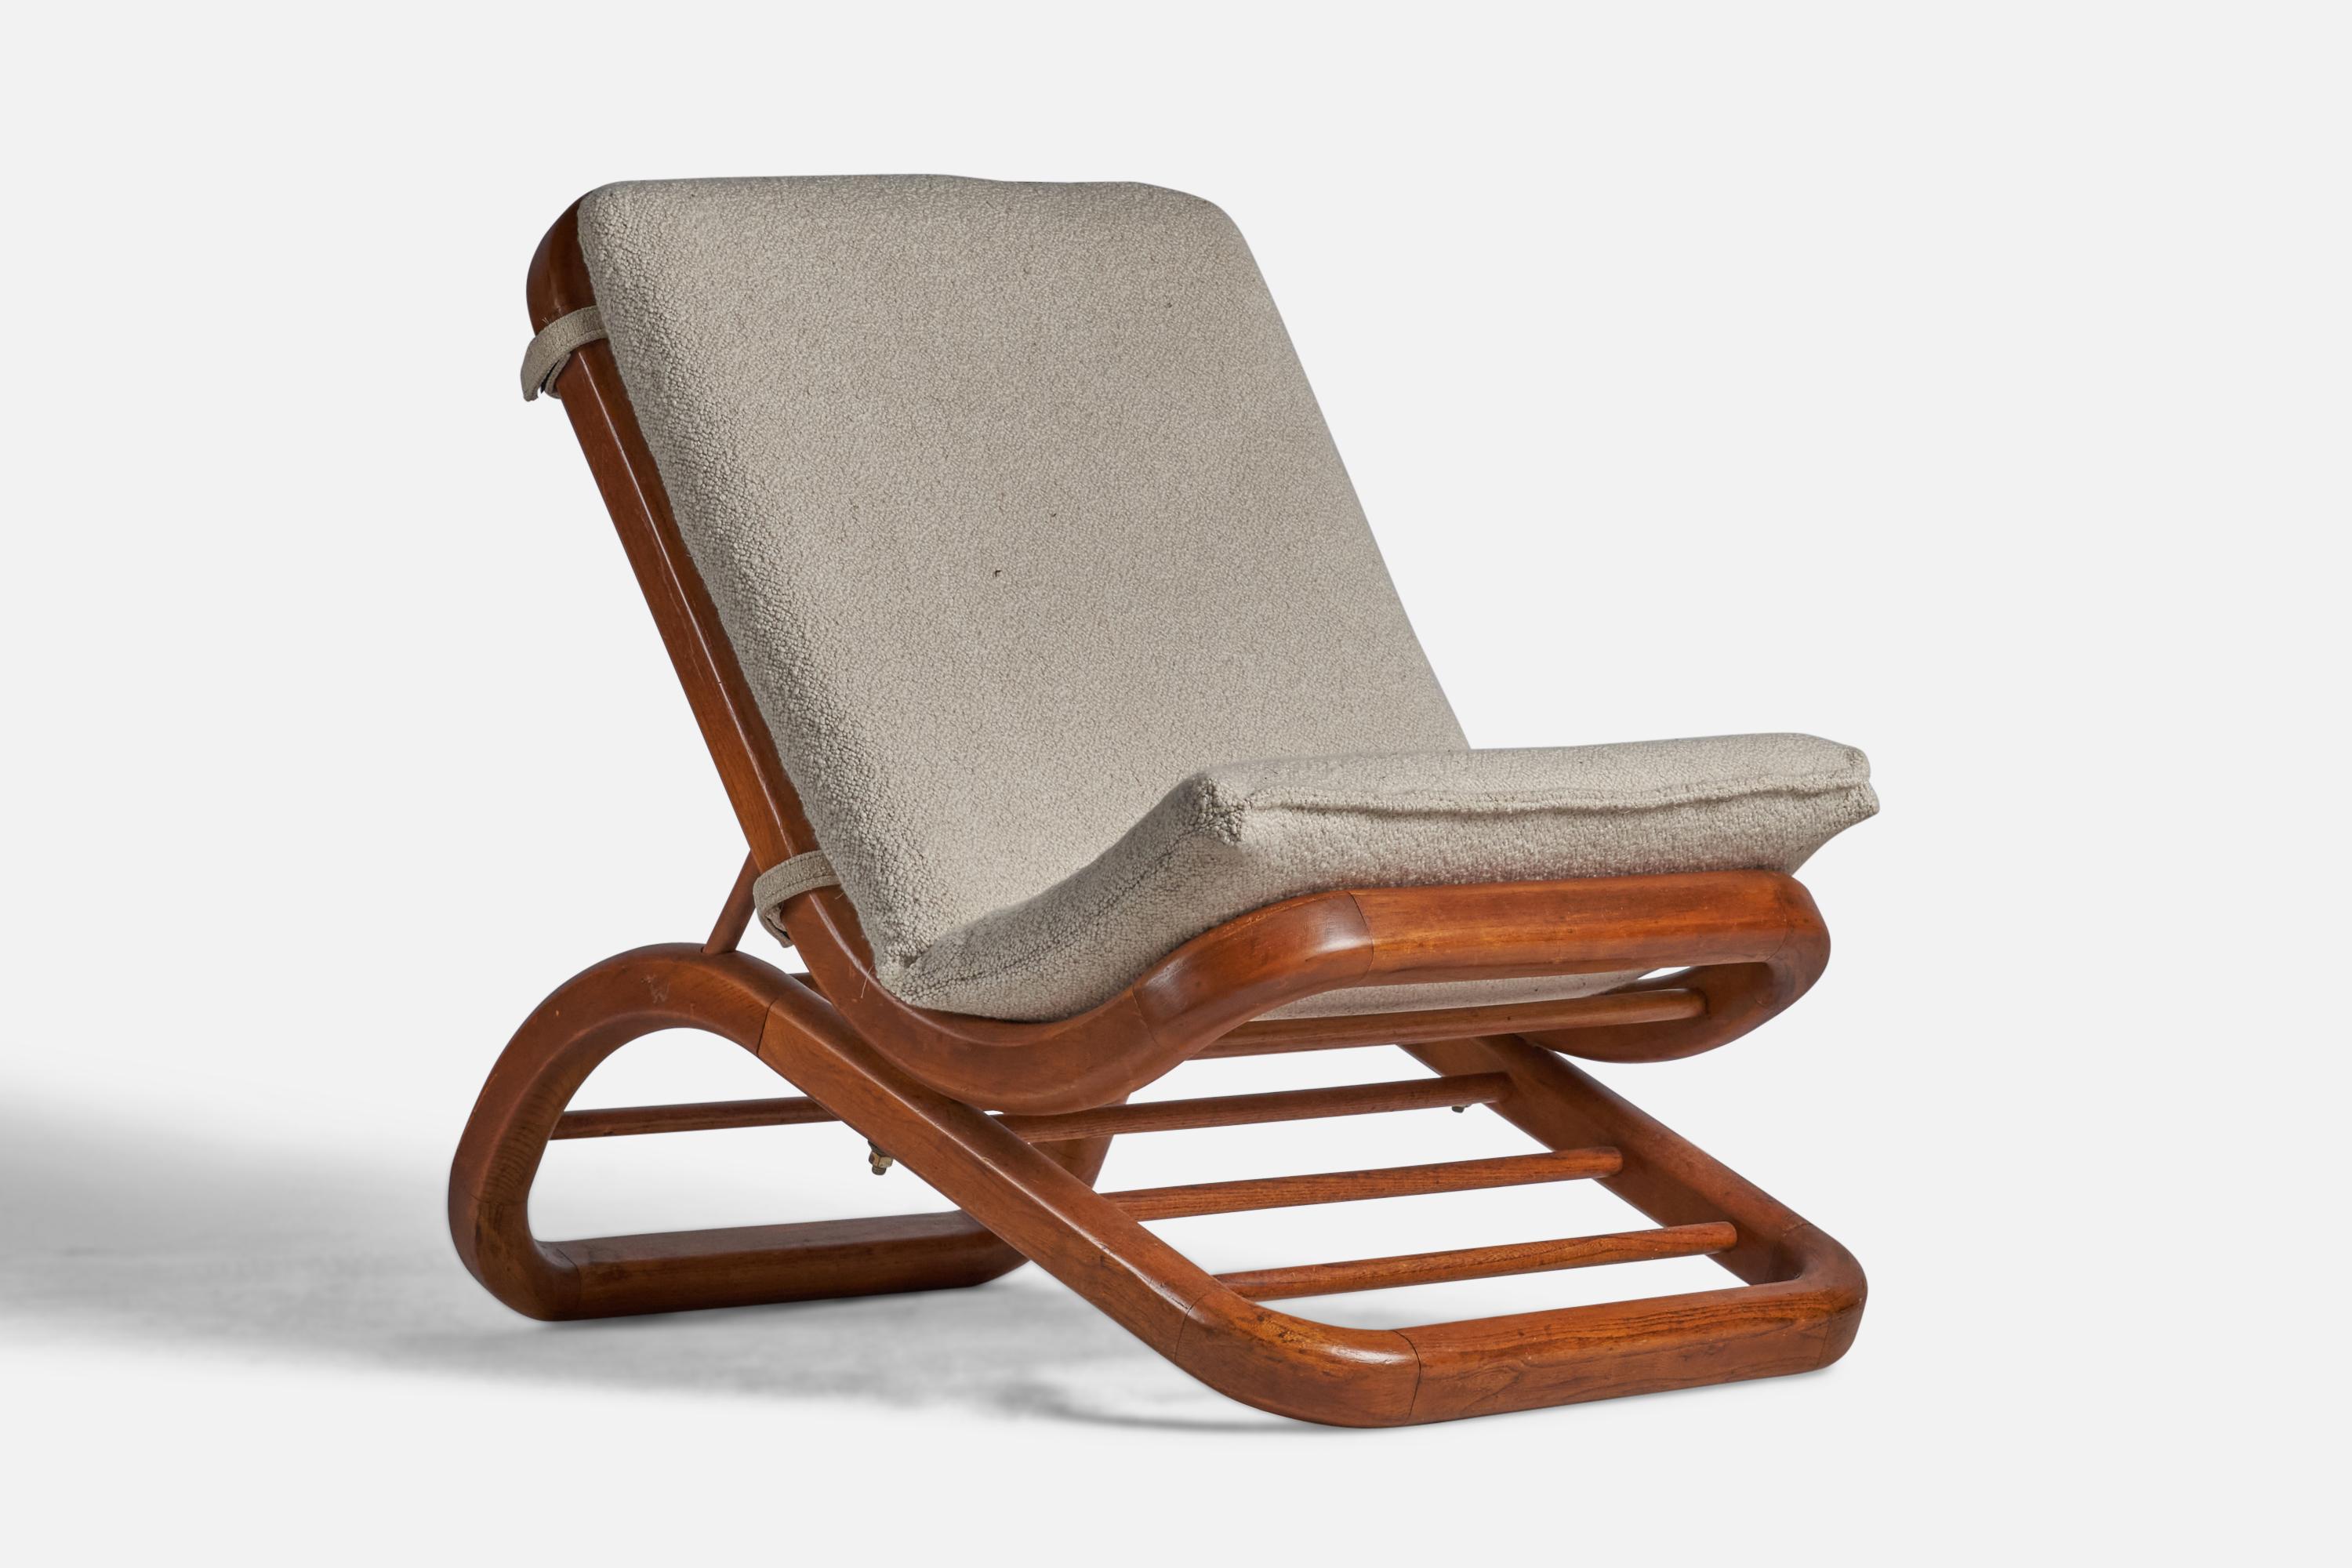 An oak and light grey fabric lounge chair designed and produced in the US, 1950s.

13” seat height